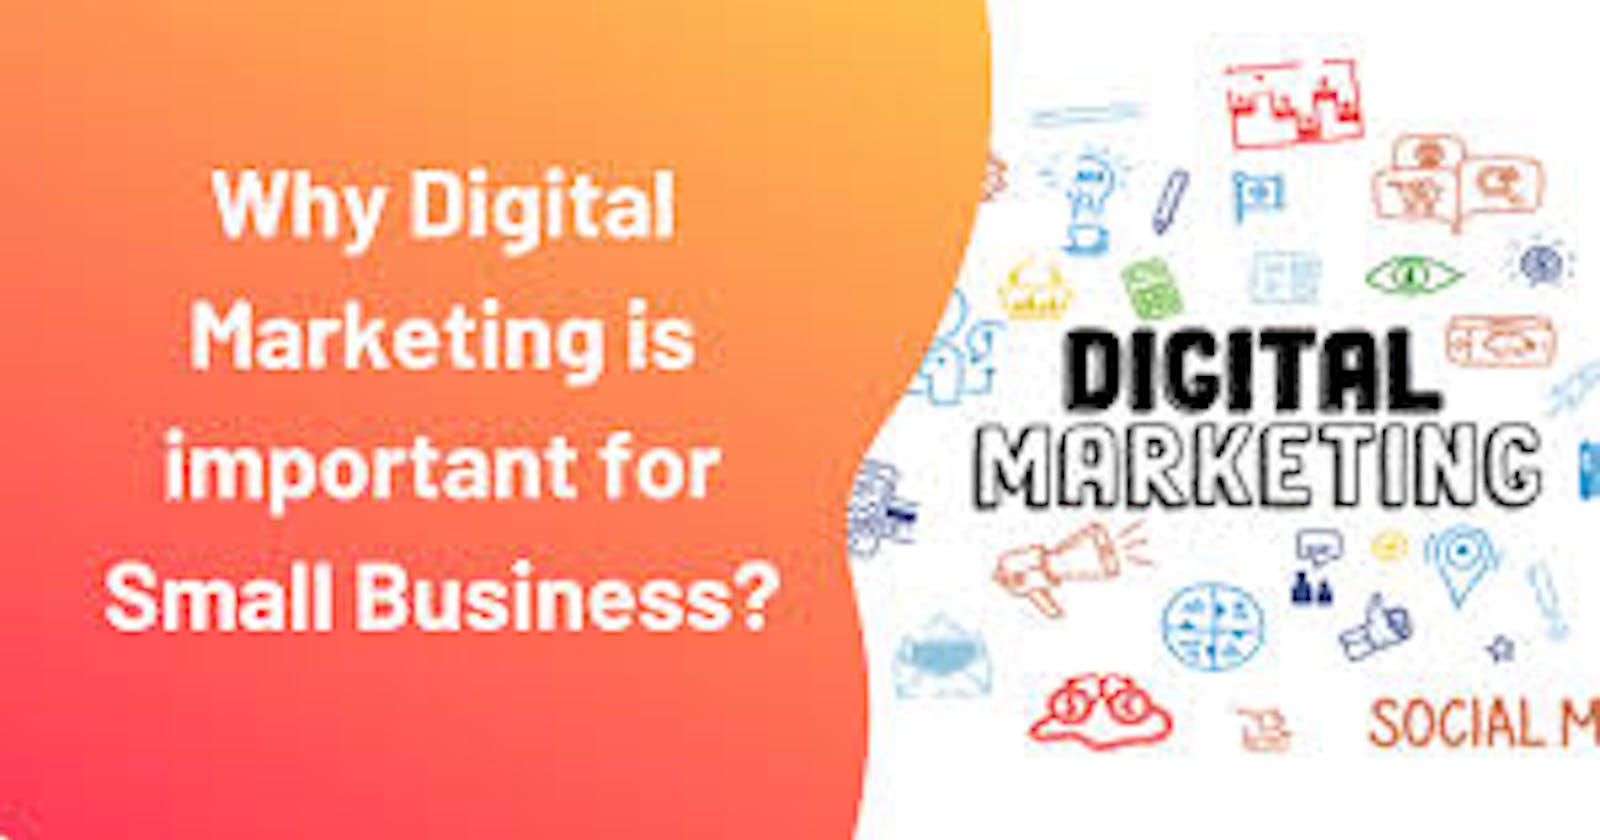 Why is Digital Marketing Important for Small Businesses?